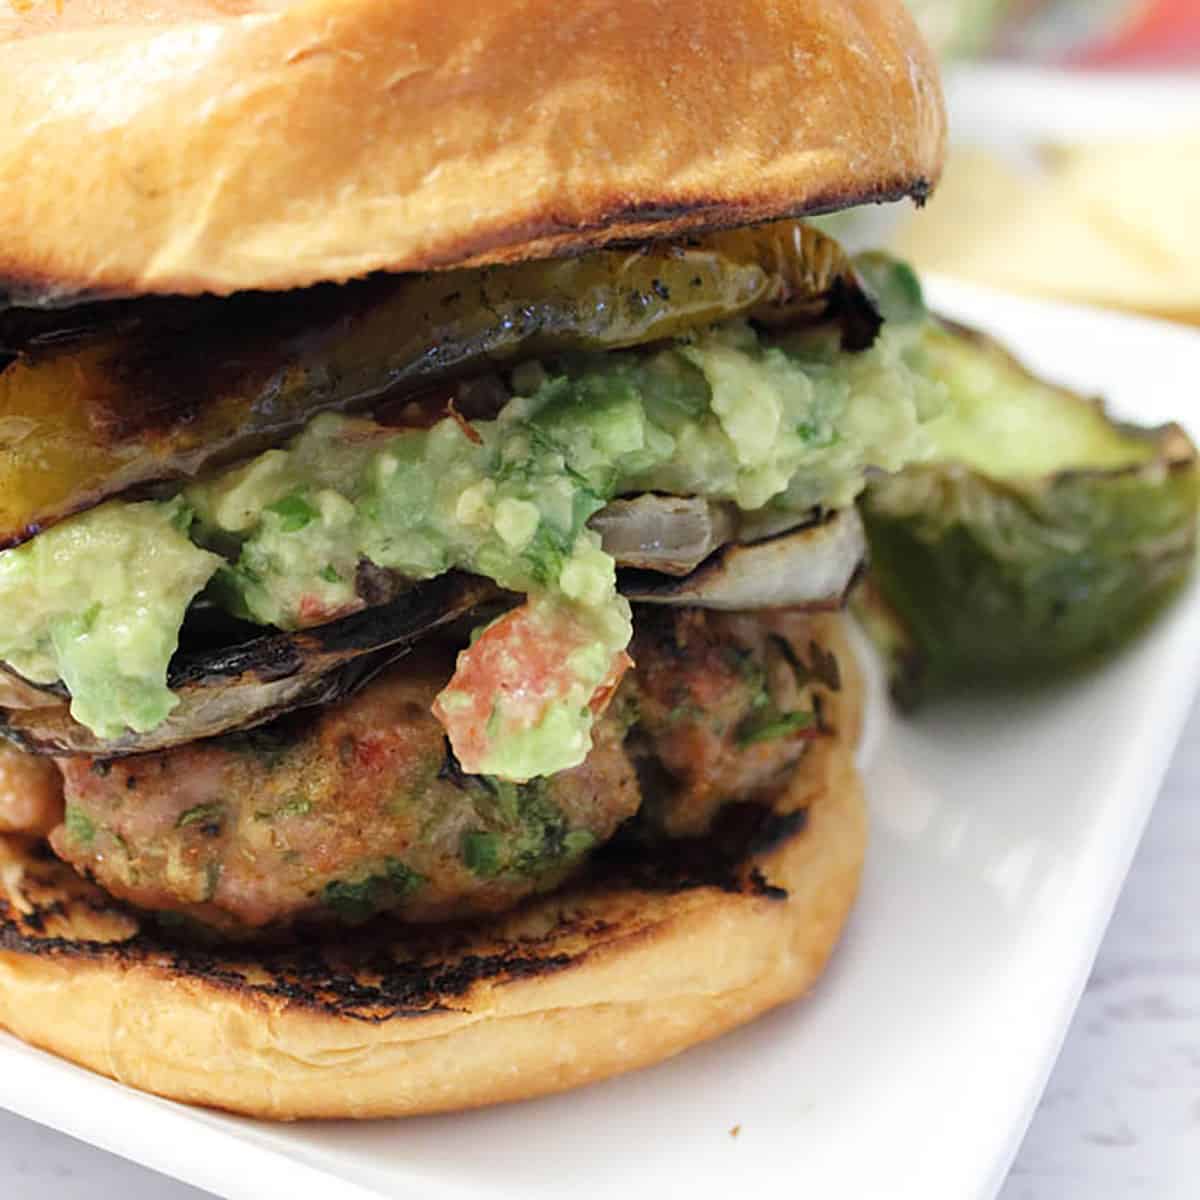 Closeup showing grilled burger with a heaping serving of guacamole on top.